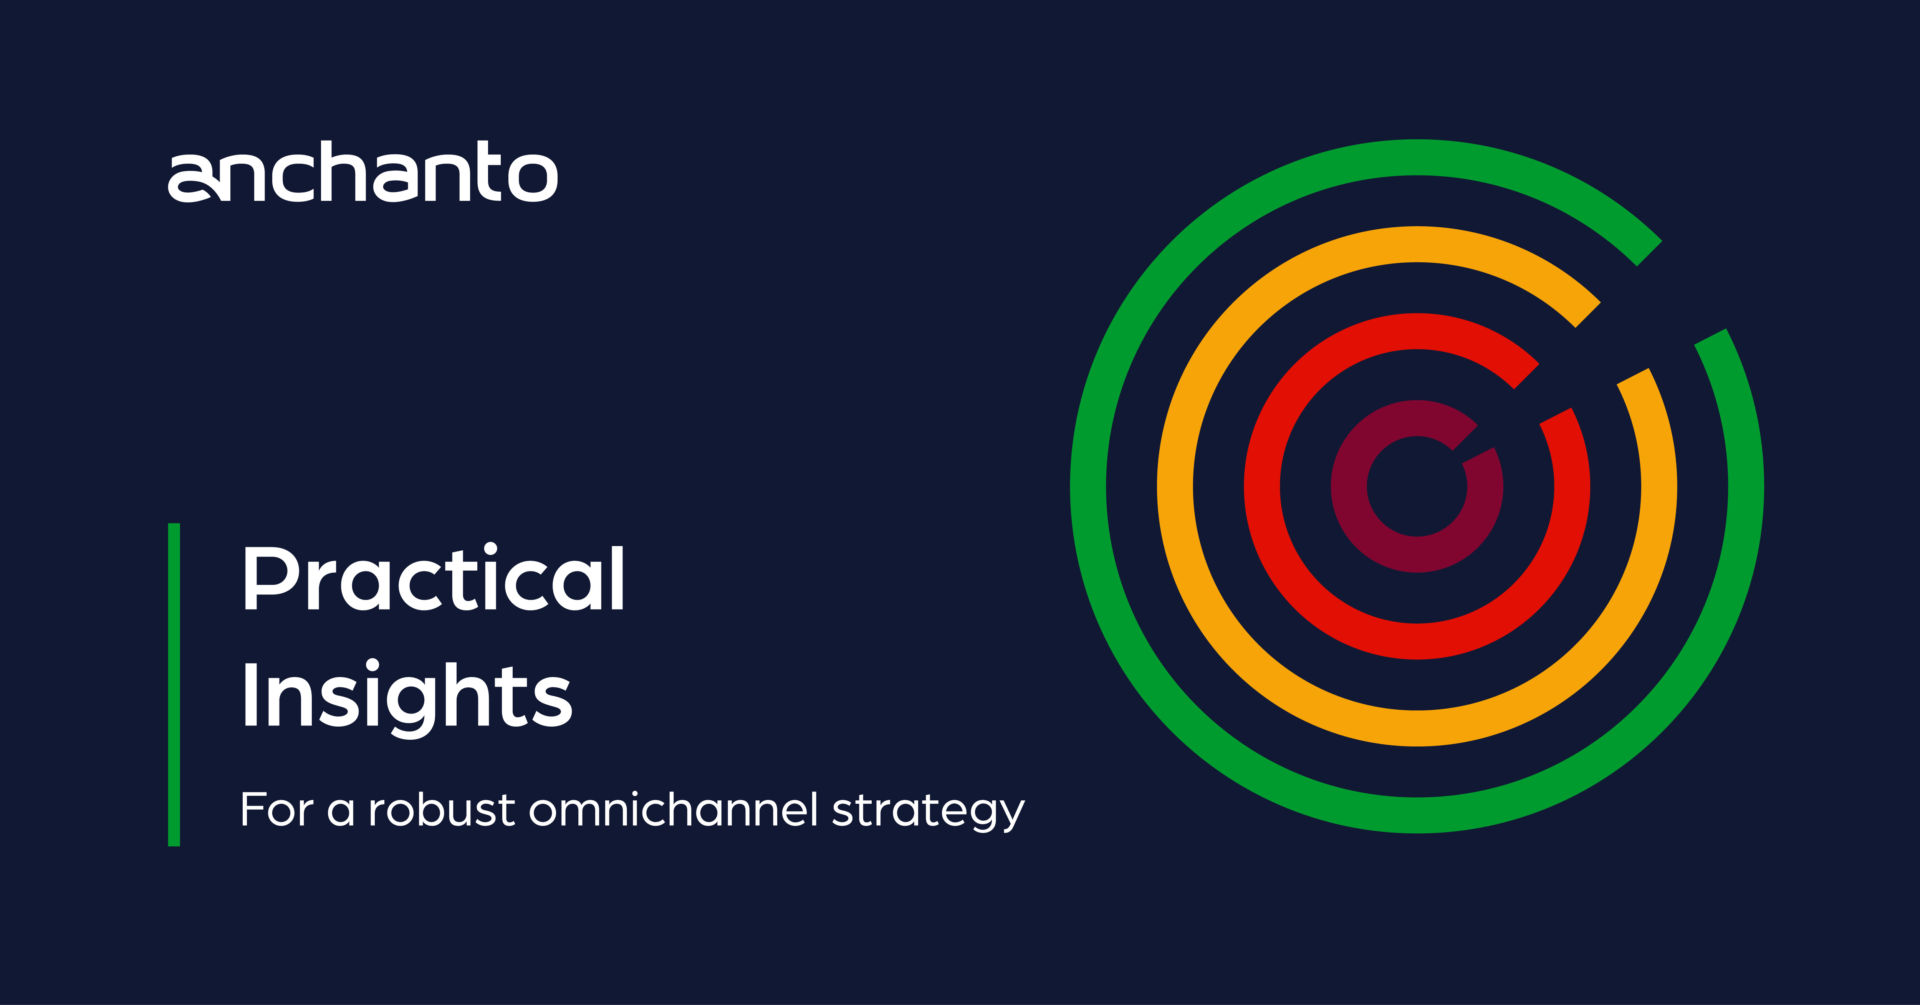 Practical insights to implement a robust Omnichannel strategy for your retail business